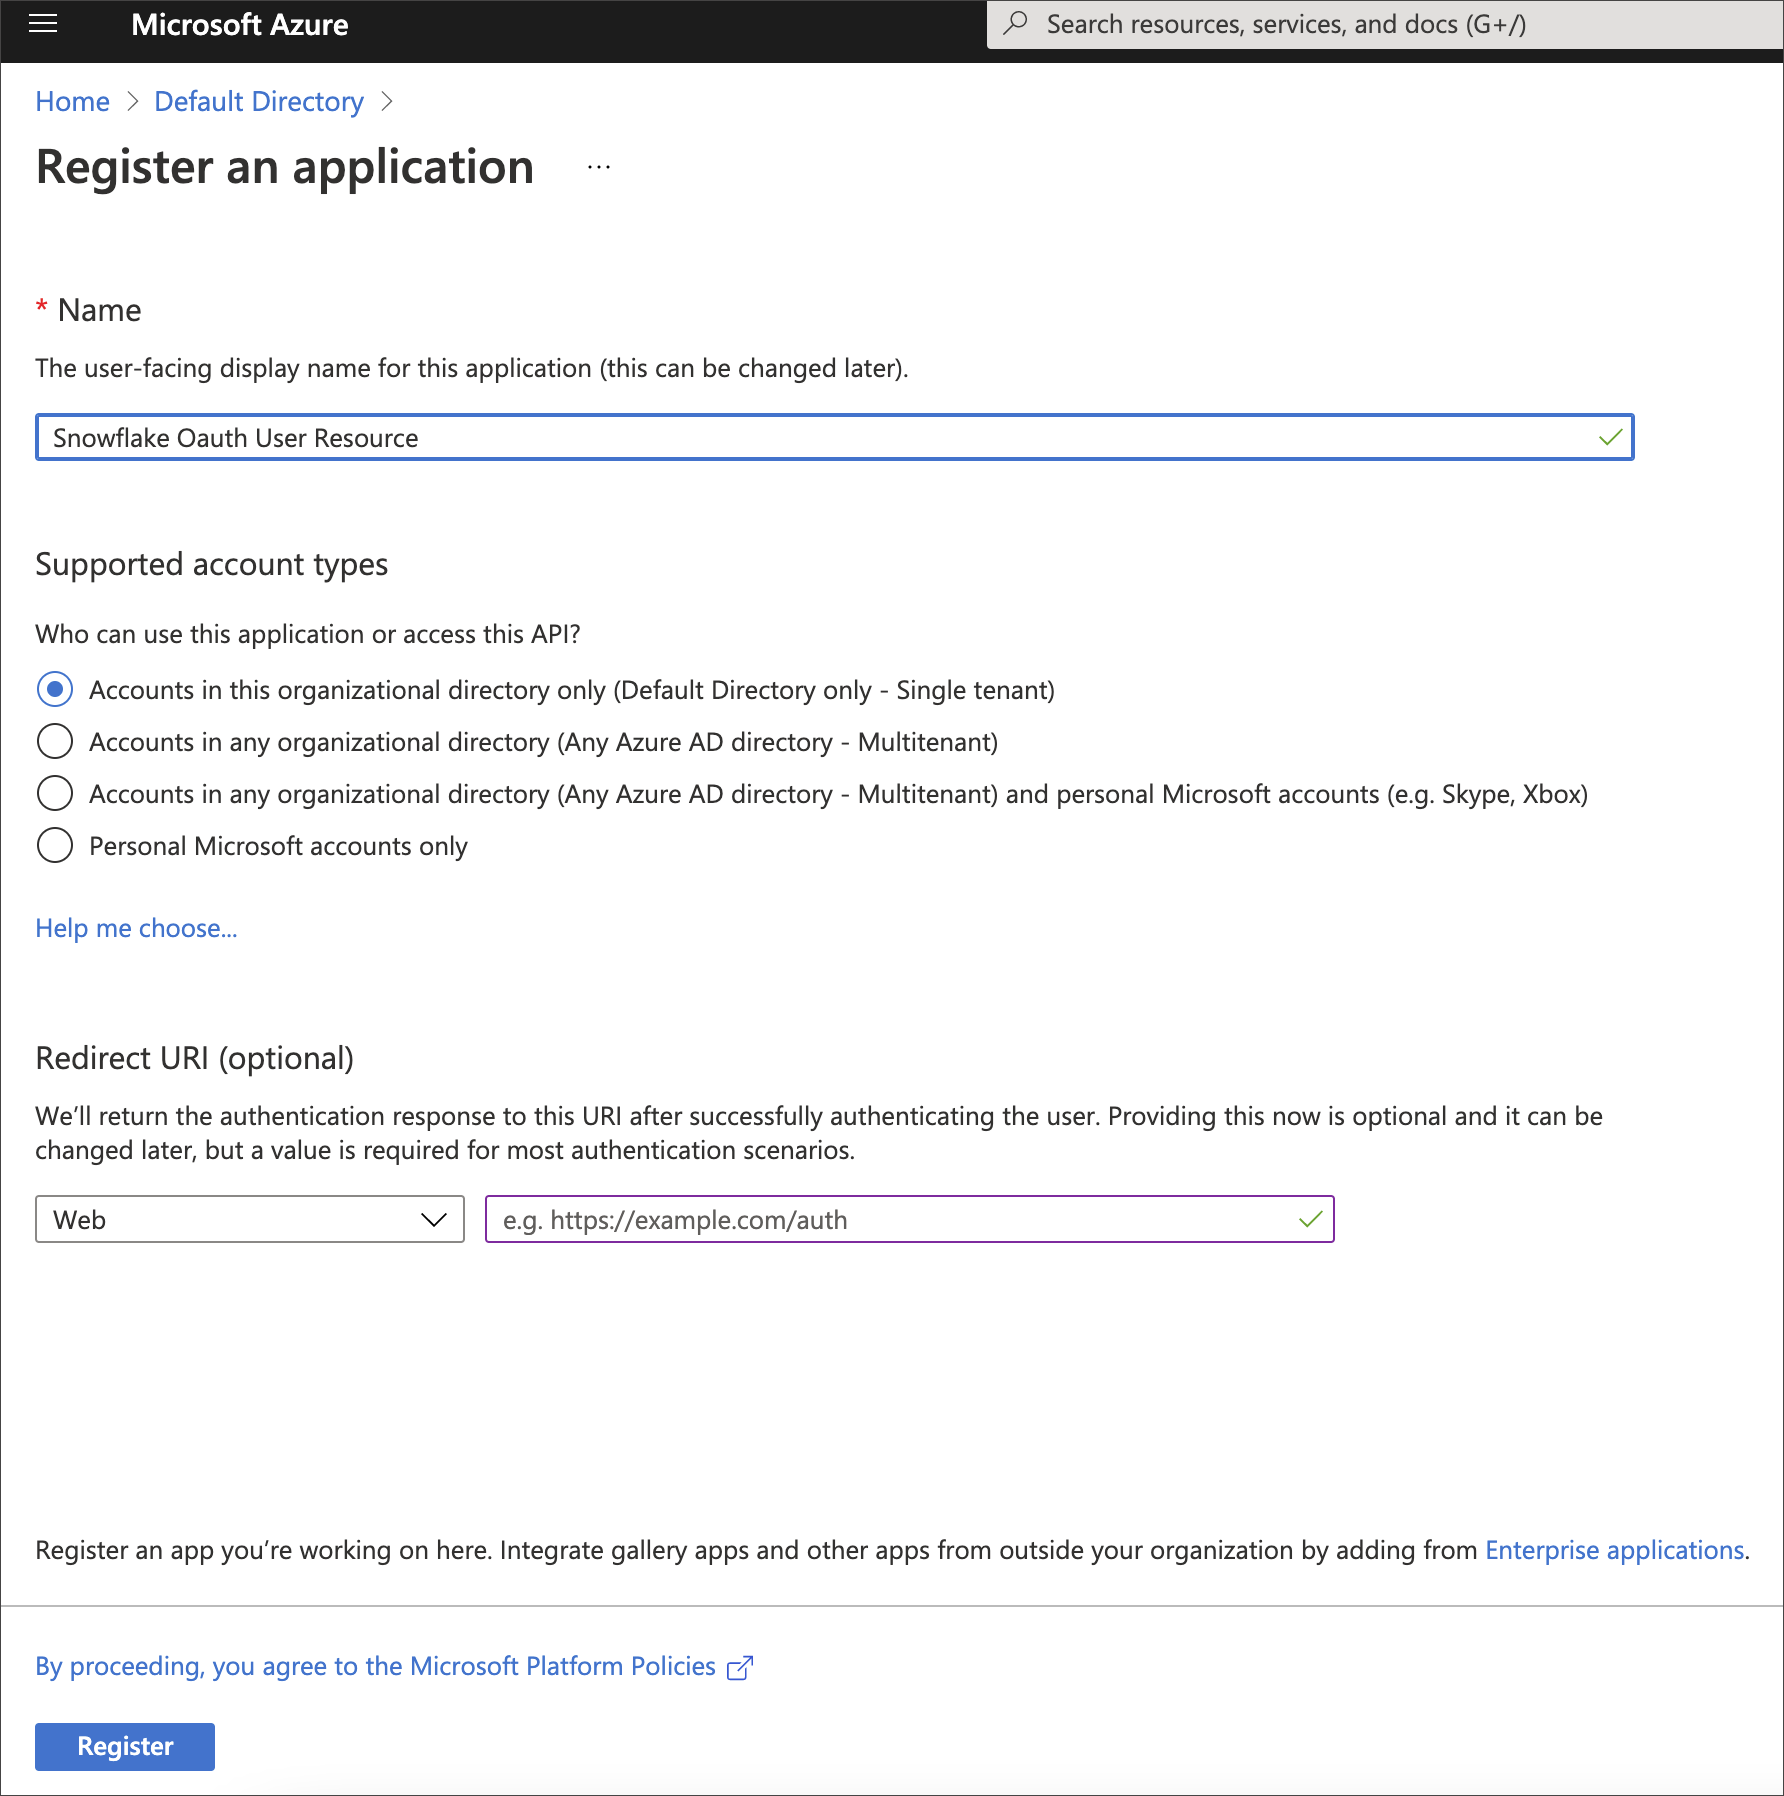 Register an application page